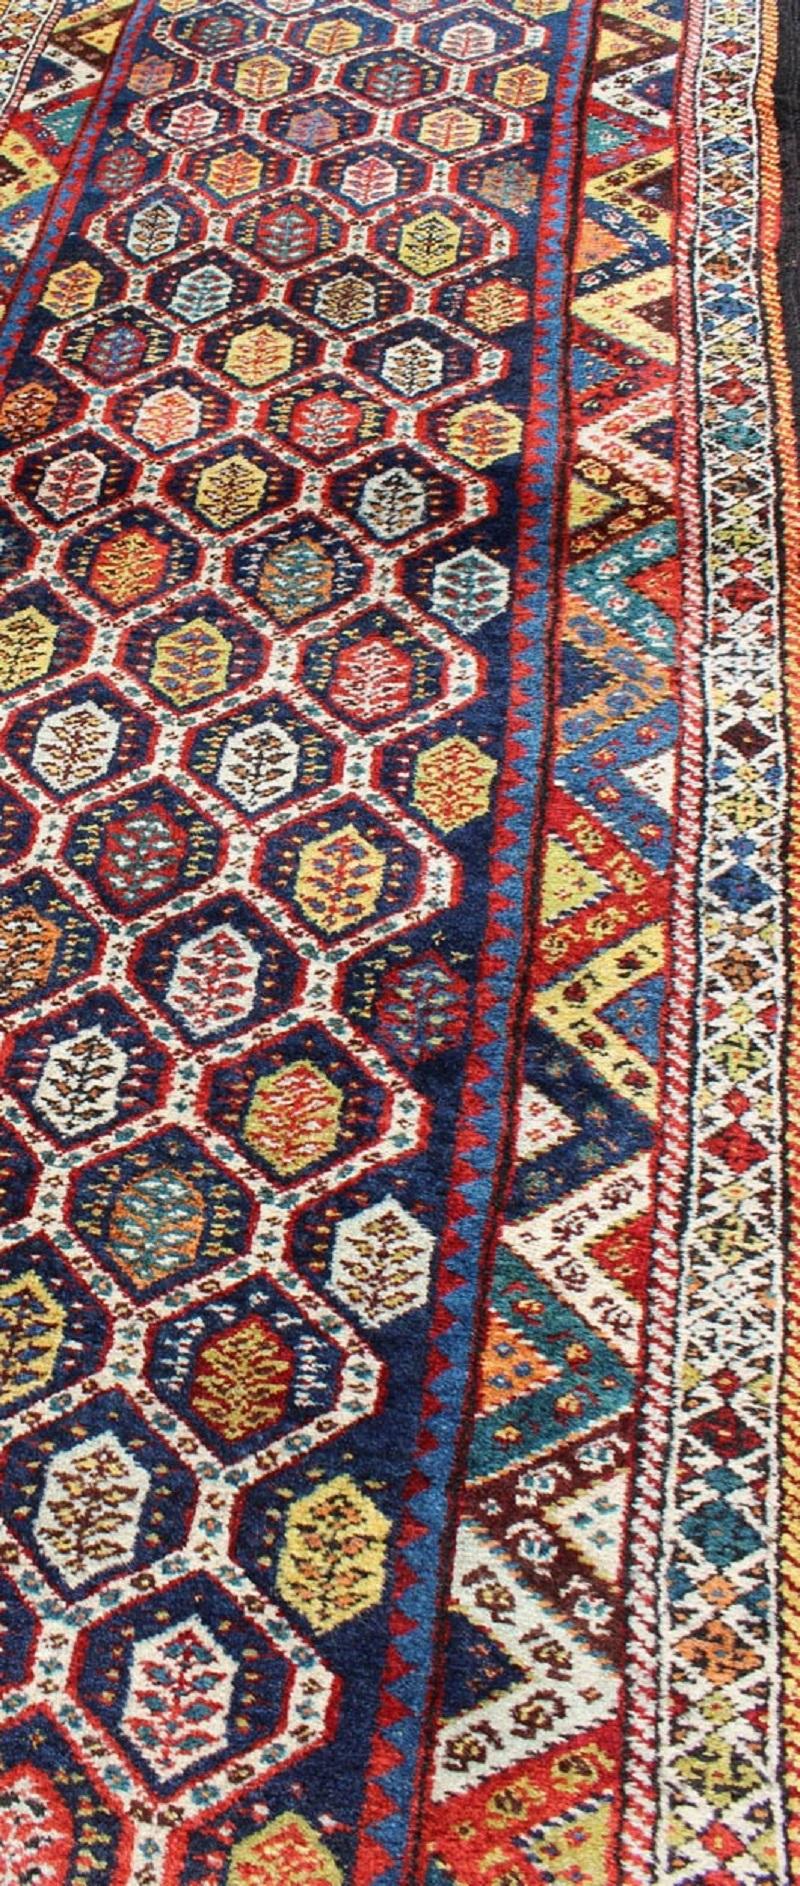 Colorful Antique Persian Lori Runner with Repeating Geometric Palmette Design For Sale 3